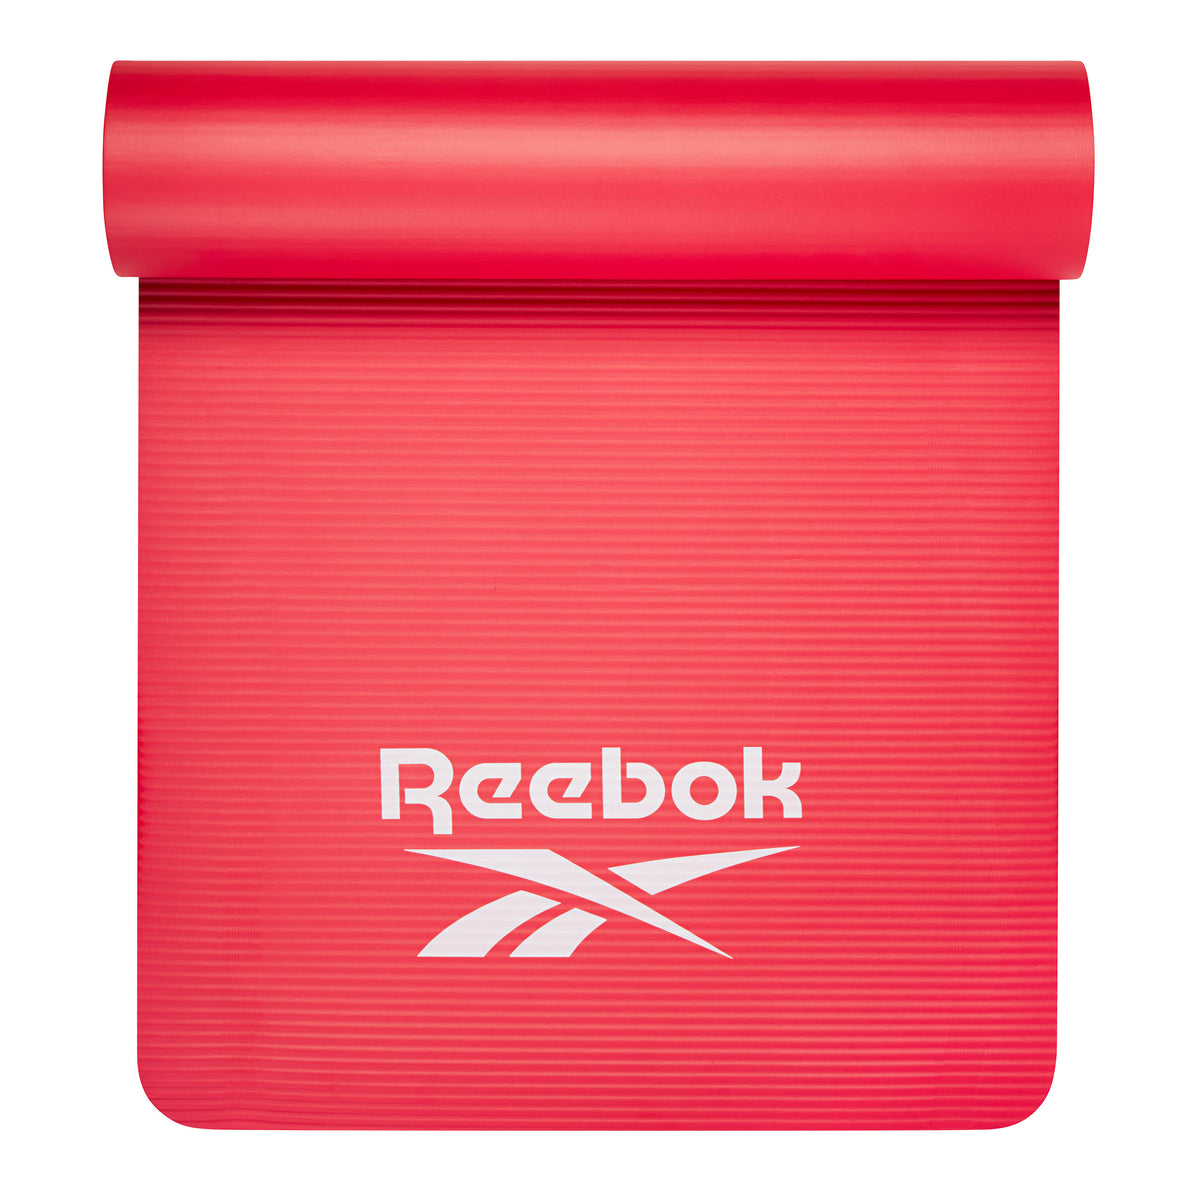 Reebok 10mm Fitness Mat Red top rolled